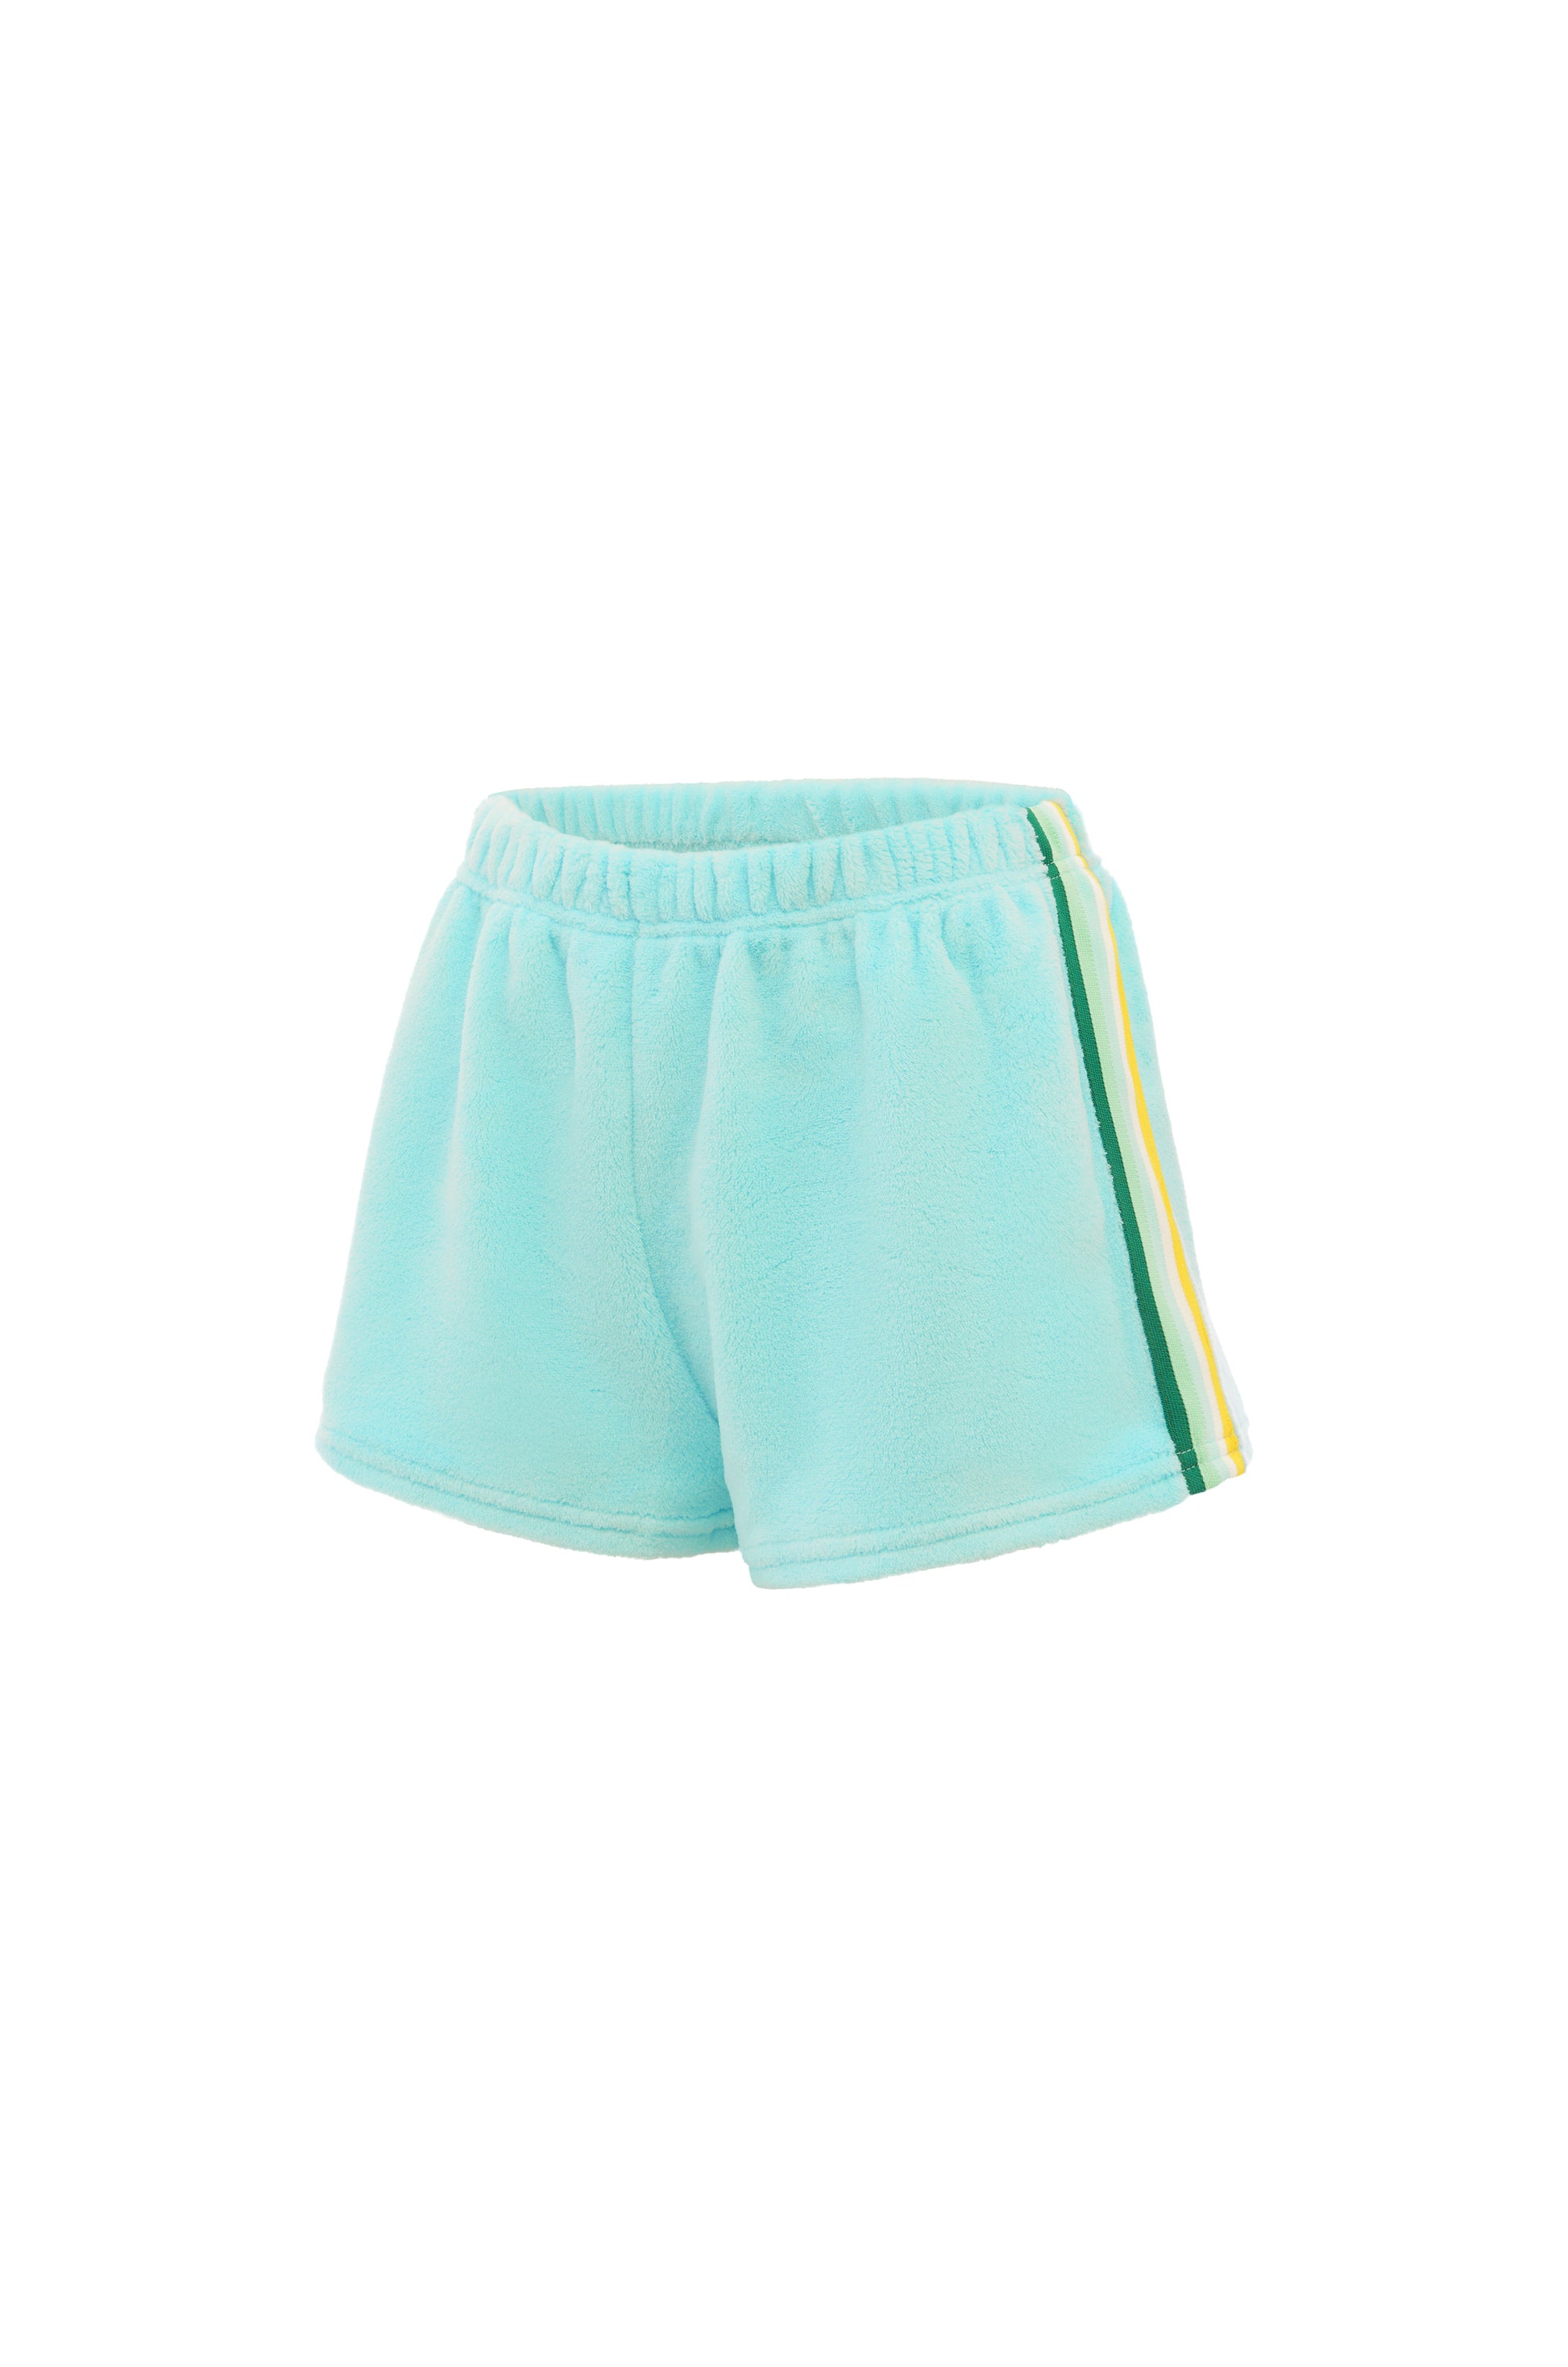 girls turquoise fleece shorts with stripes on side